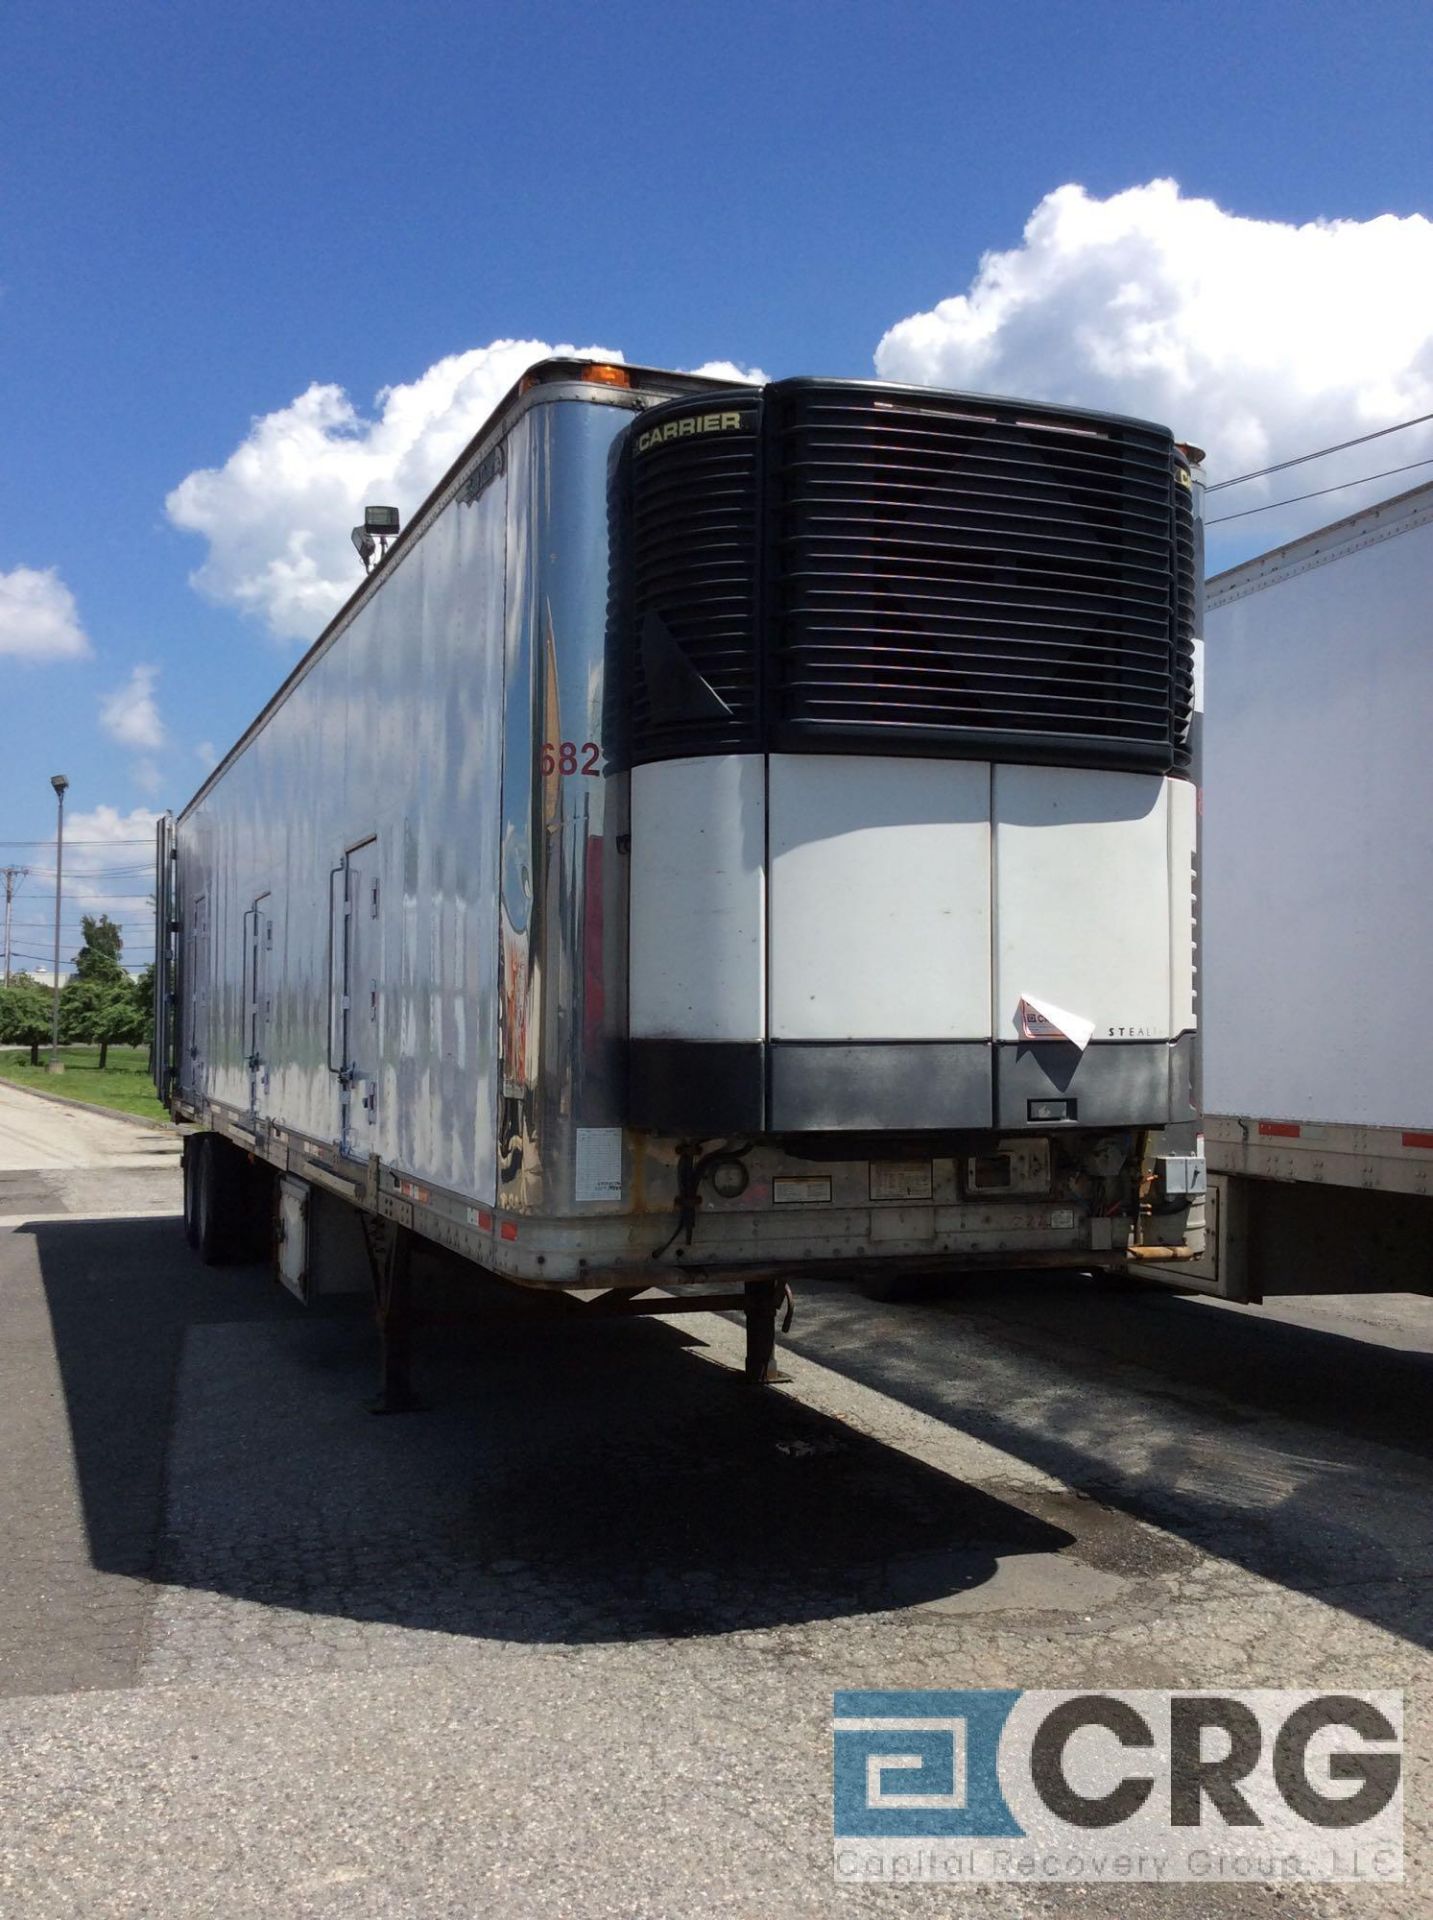 2005 Great Dane Multi Temp Refrigerated Semi Trailer - 43 Long, 96" wide, Carrier Stealth, hours, 6 - Image 3 of 6